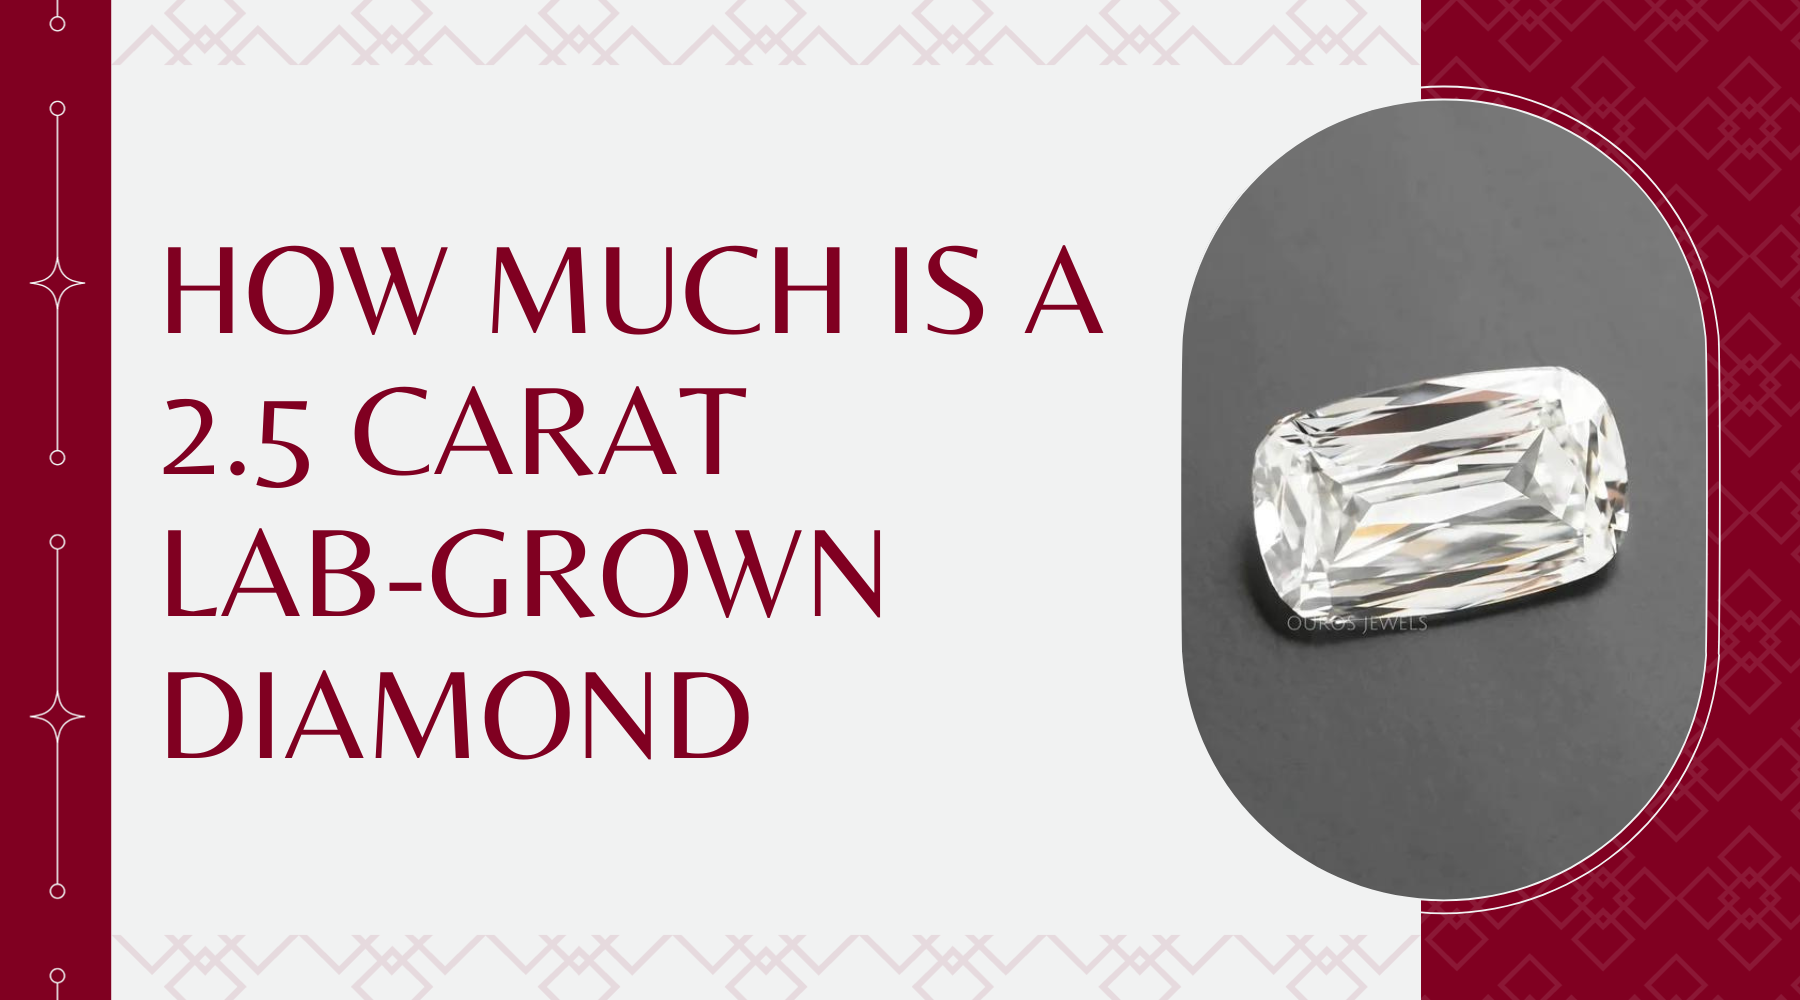 The Ultimate Guide: Lab Grown Diamonds - Unveiling the True Value of a 2.5 Carat Diamond